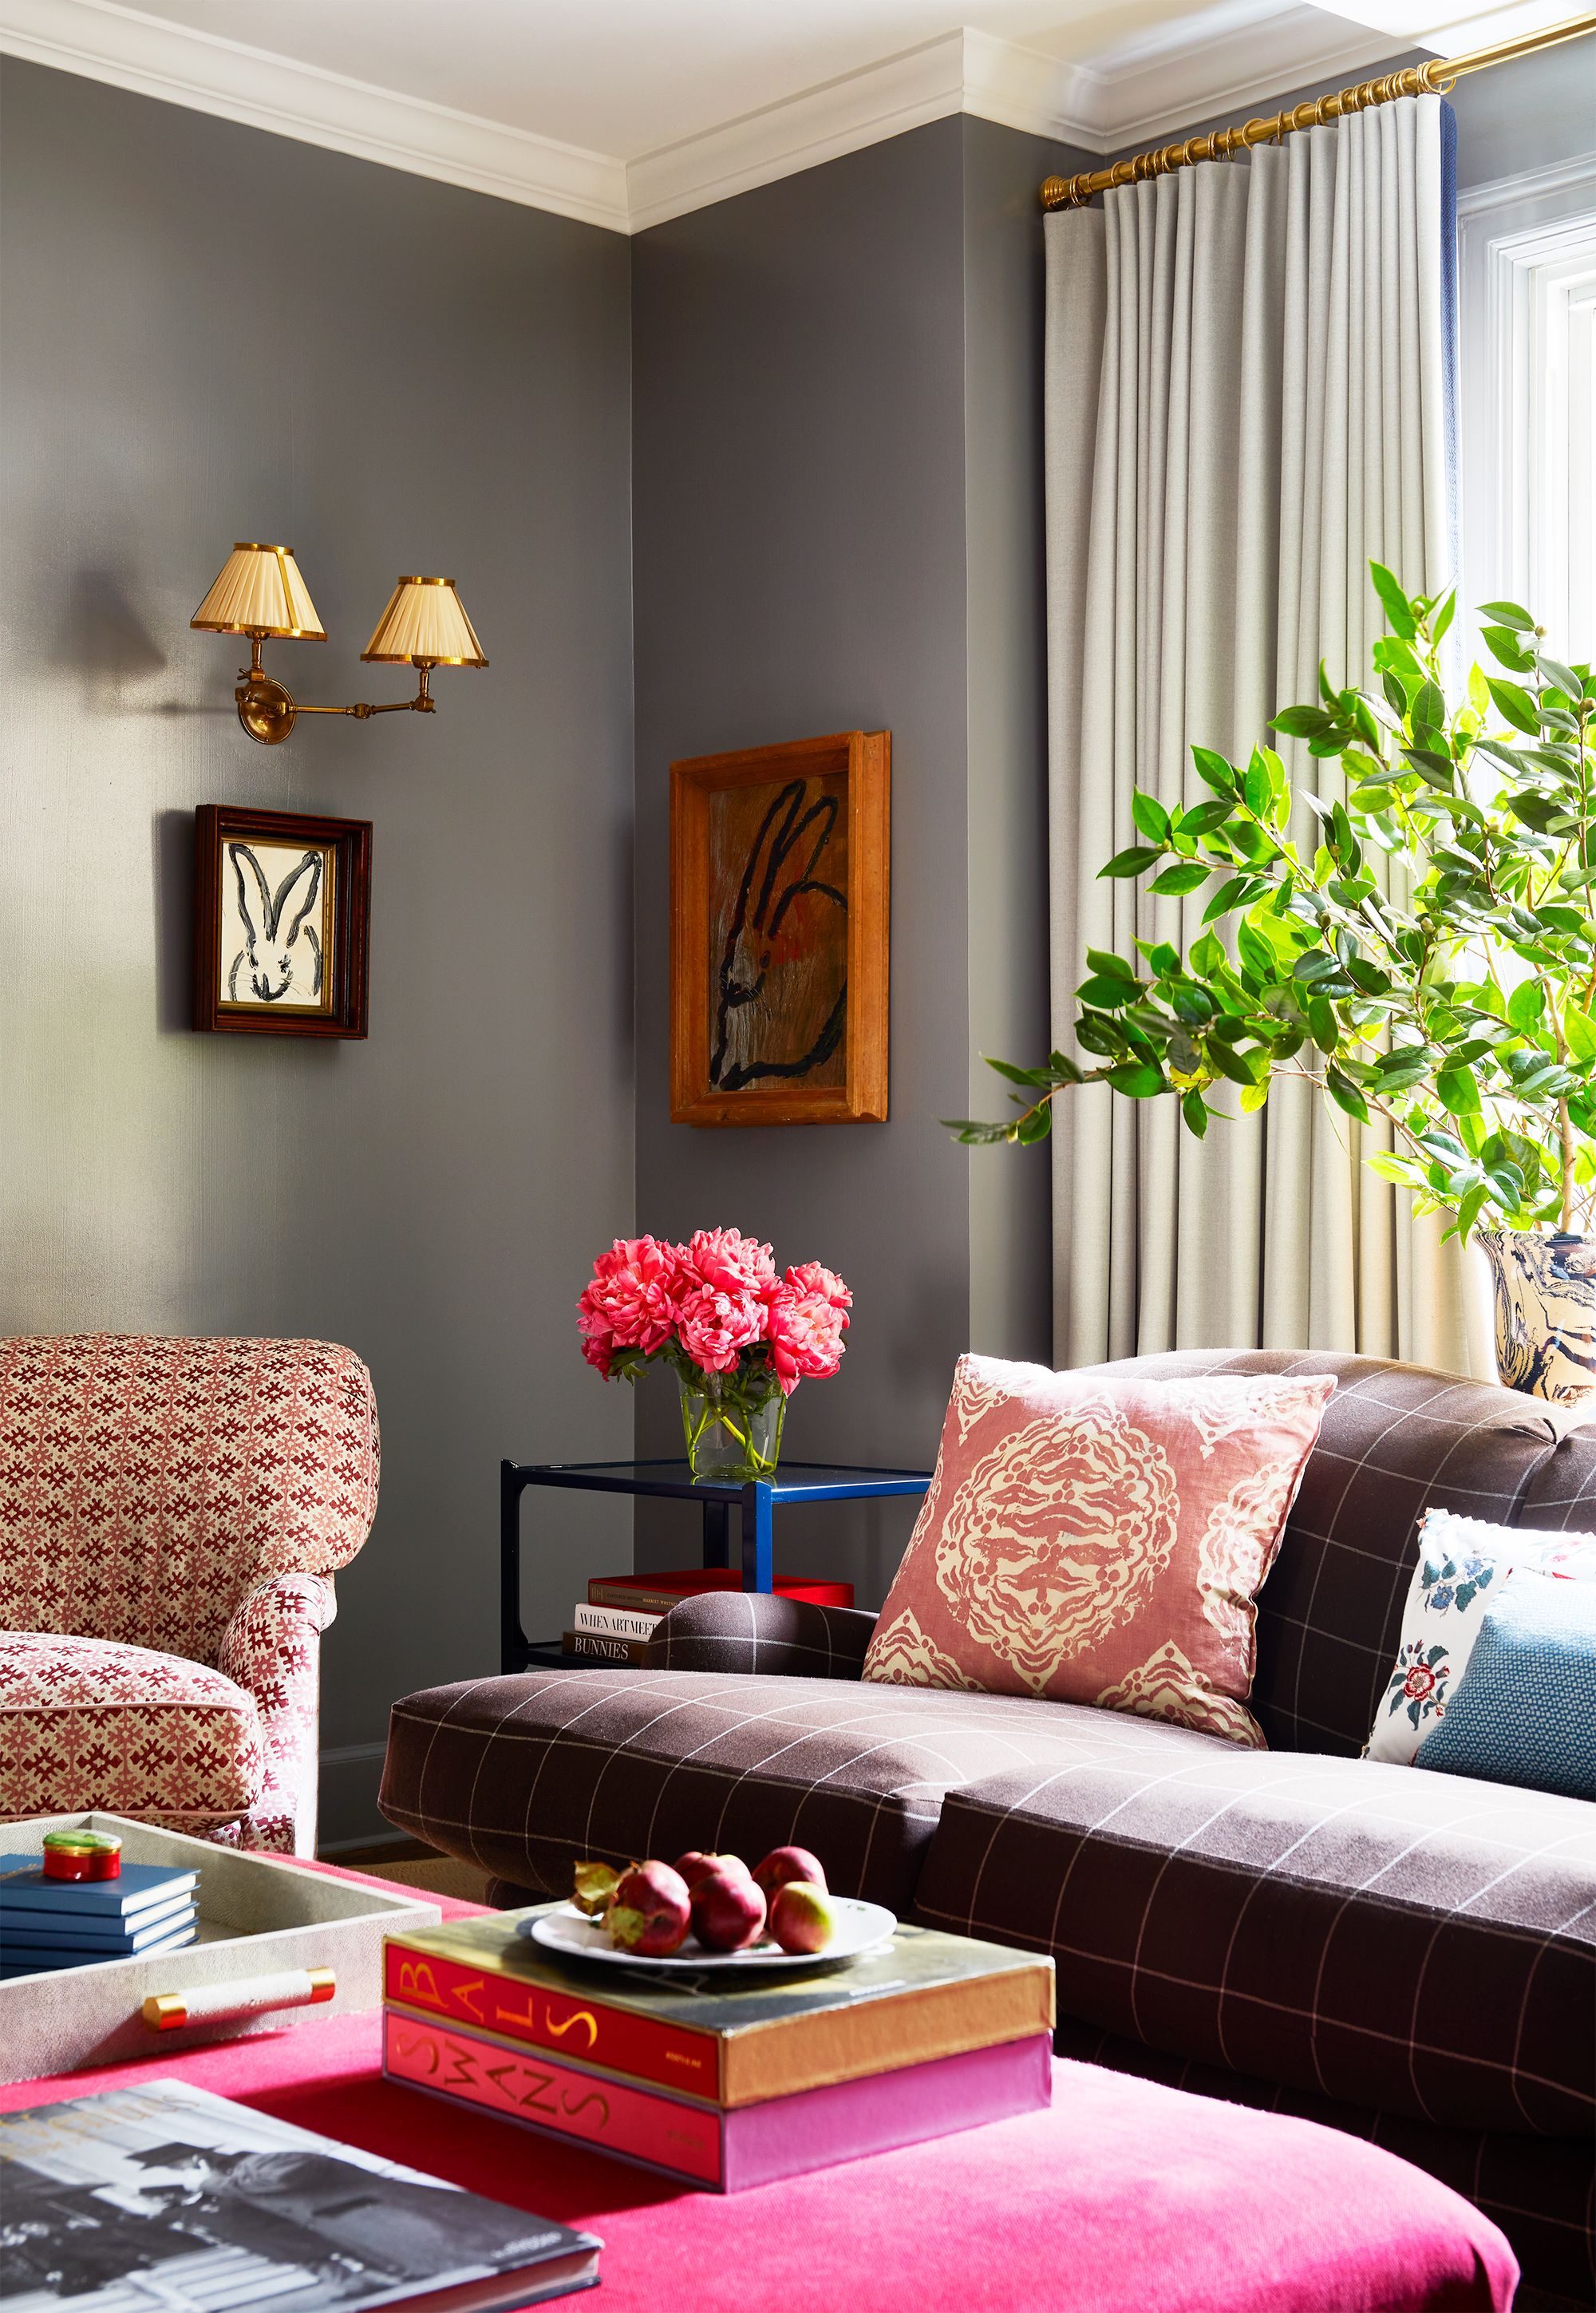 How to Use the Color Wheel to Pick the Right Palette for Any Room